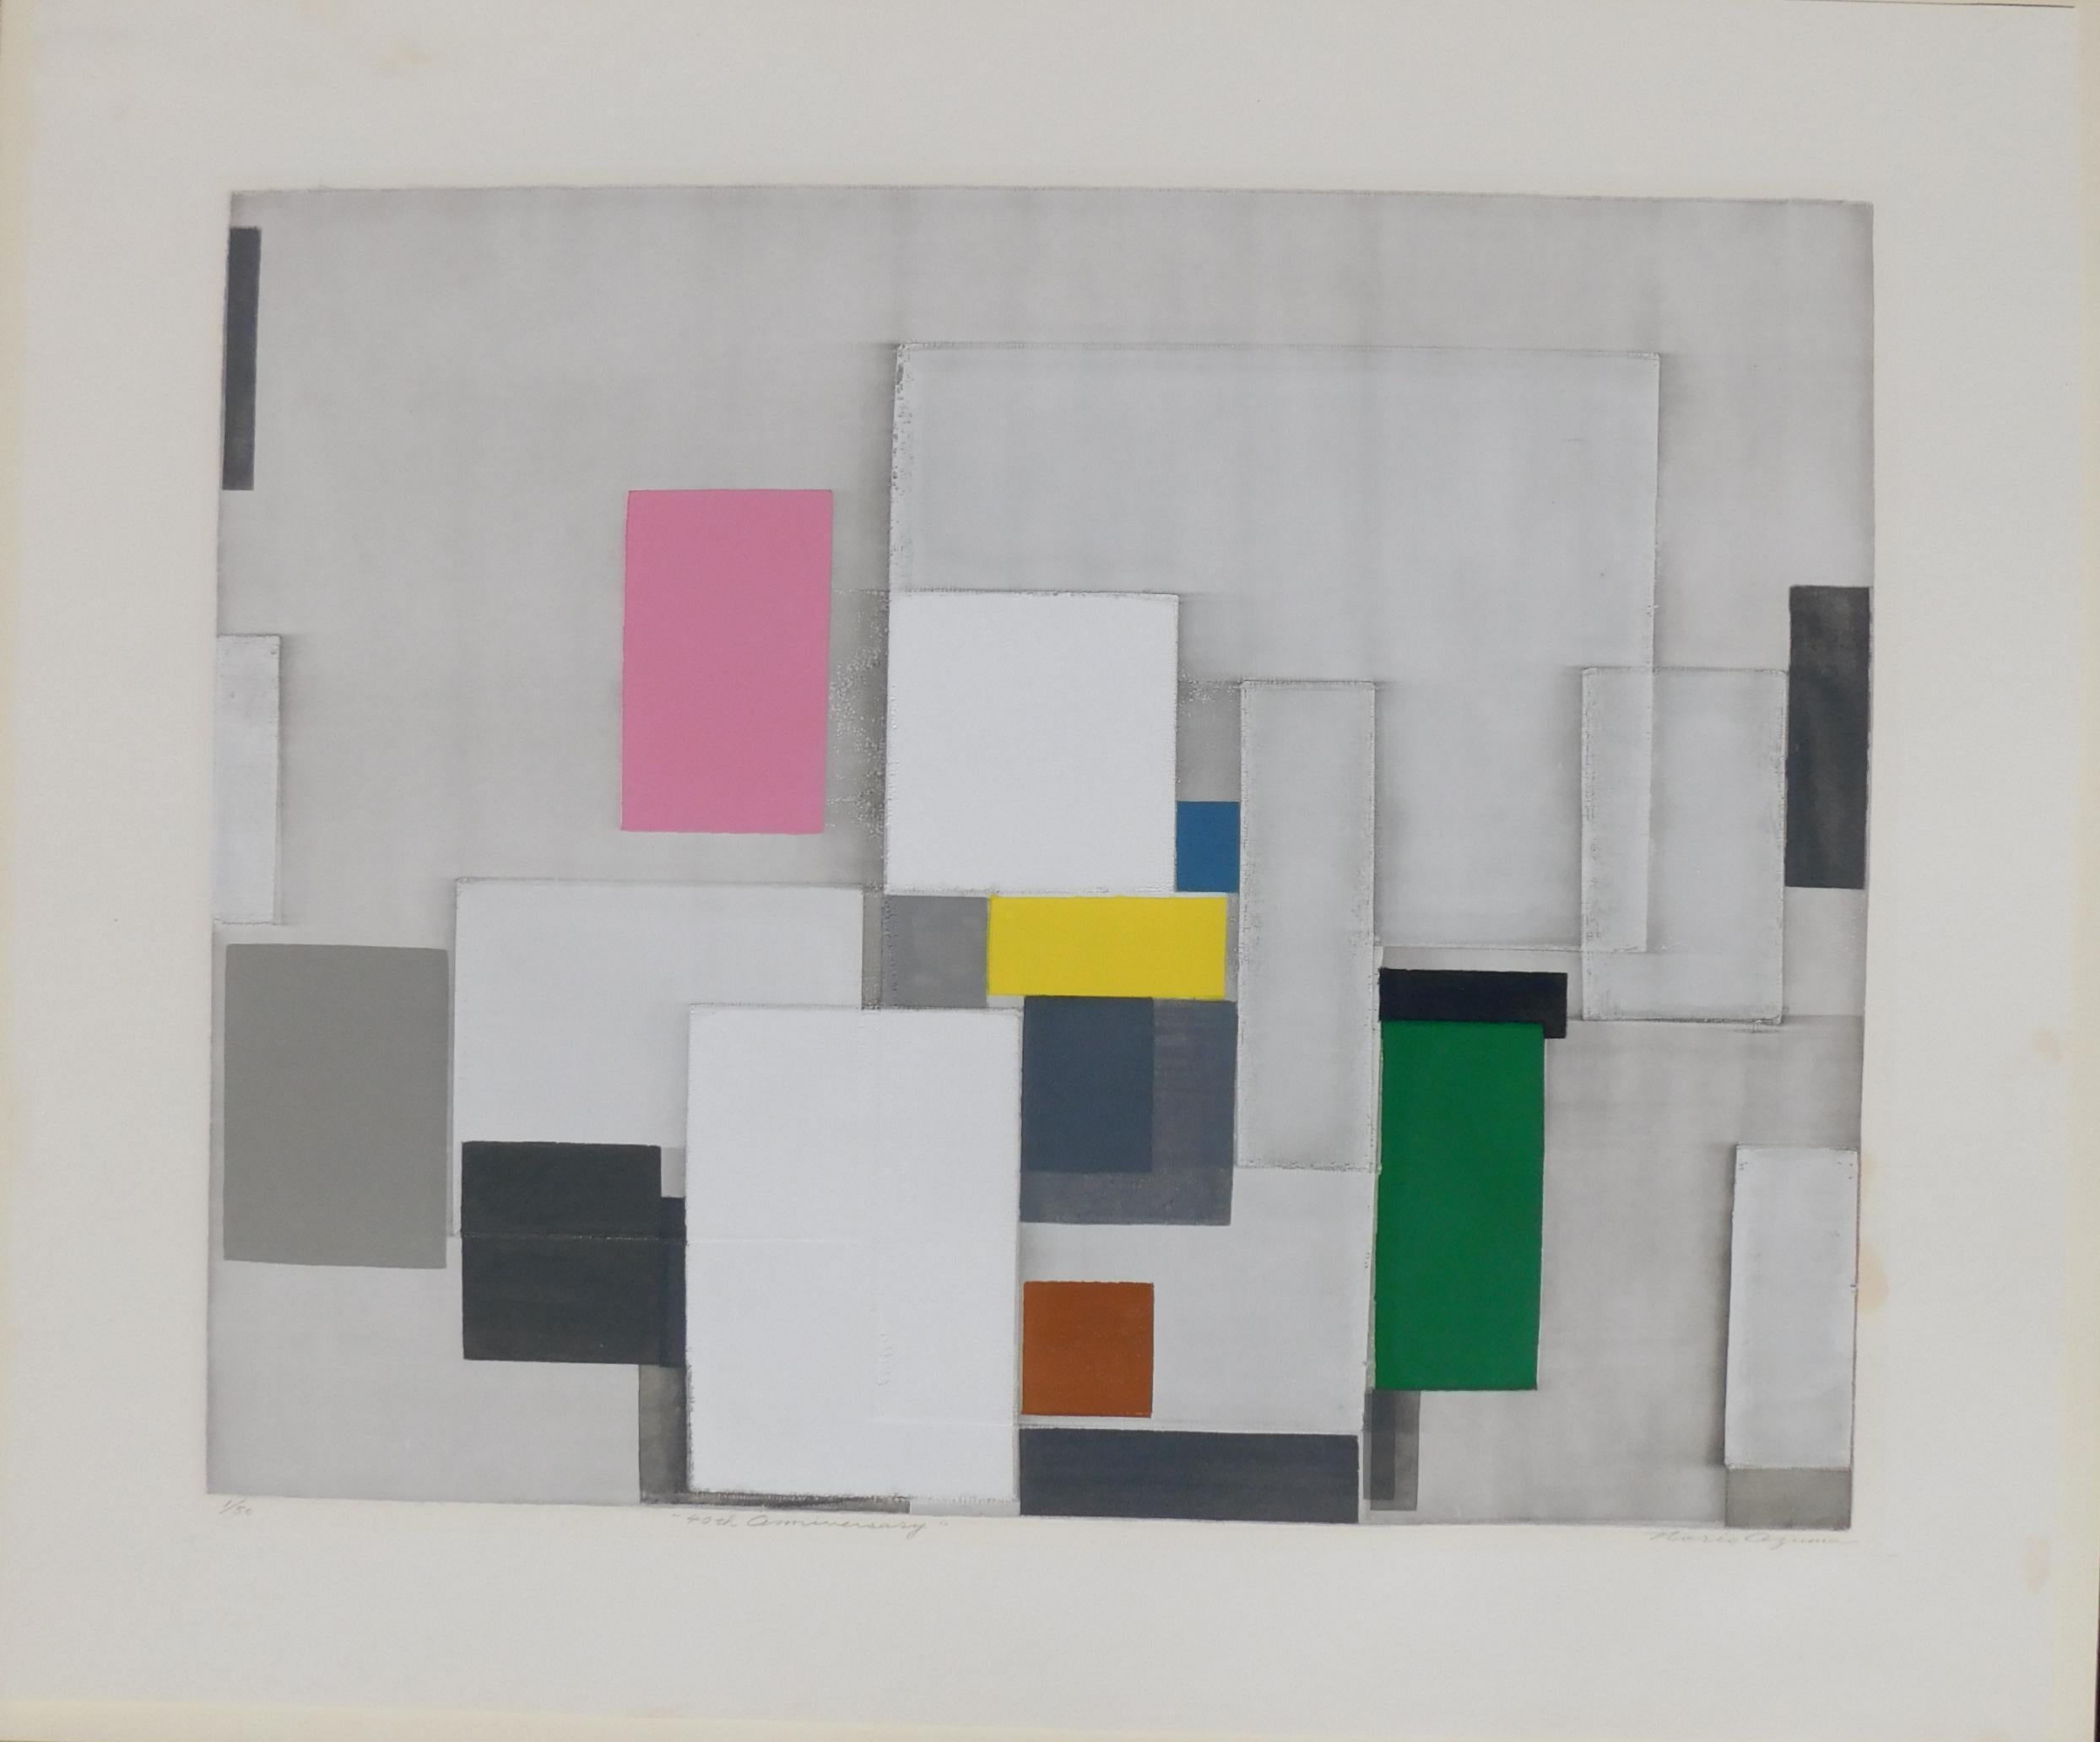 Beautiful signed and numbered abstract serigraph by Japanese artist Norio Azuma. 

Artist: Norio Azuma, Japanese (1928 - 2004)
Title: 40th Anniversary
Year: circa 1970's
Medium: Serigraph on paper. Signed, titled and numbered in